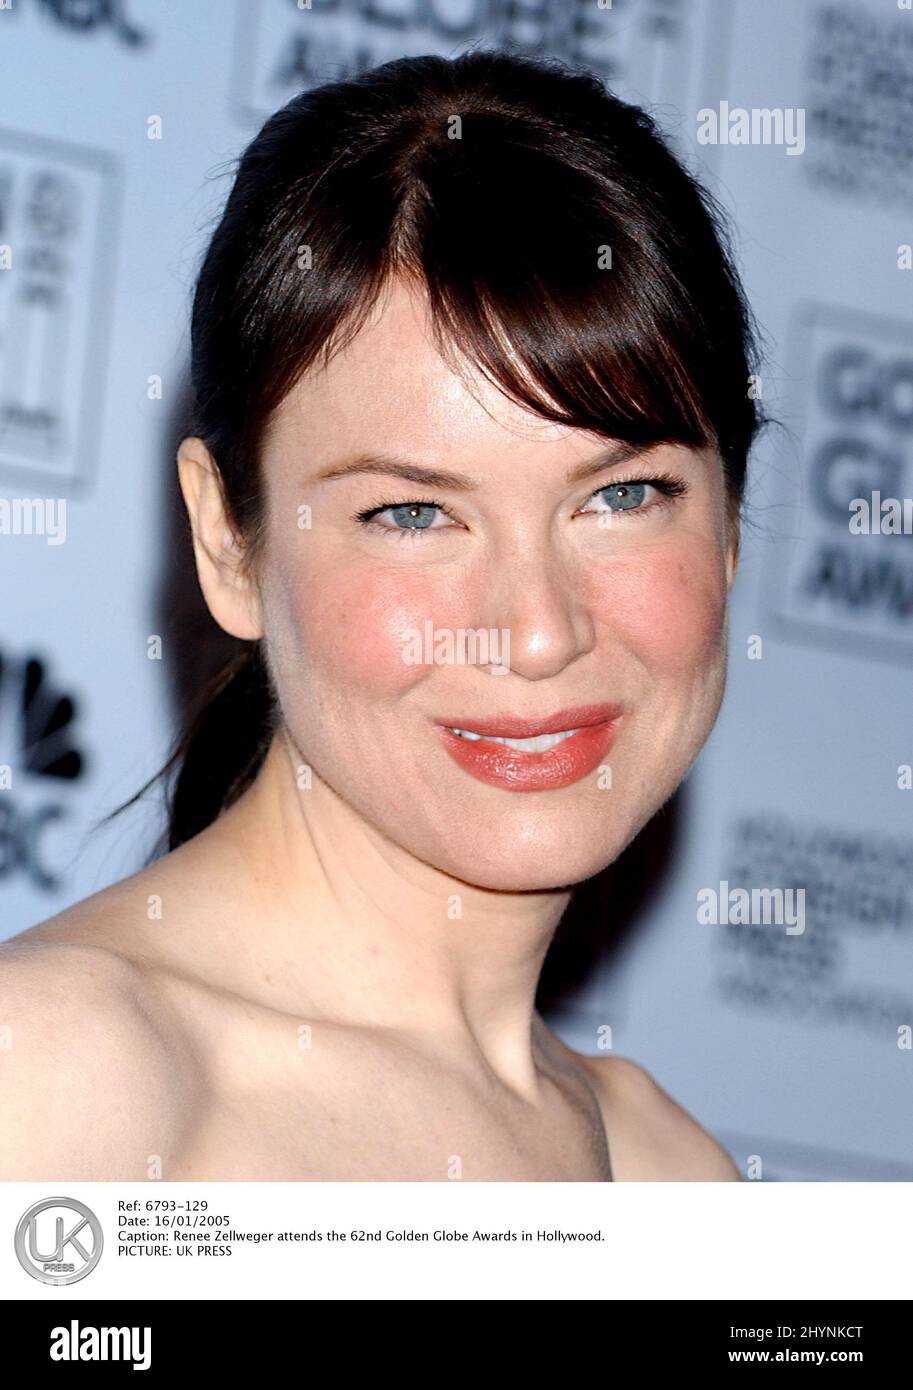 Renee Zellweger attends the 62nd Golden Globe Awards in Hollywood. Picture: UK Press Stock Photo